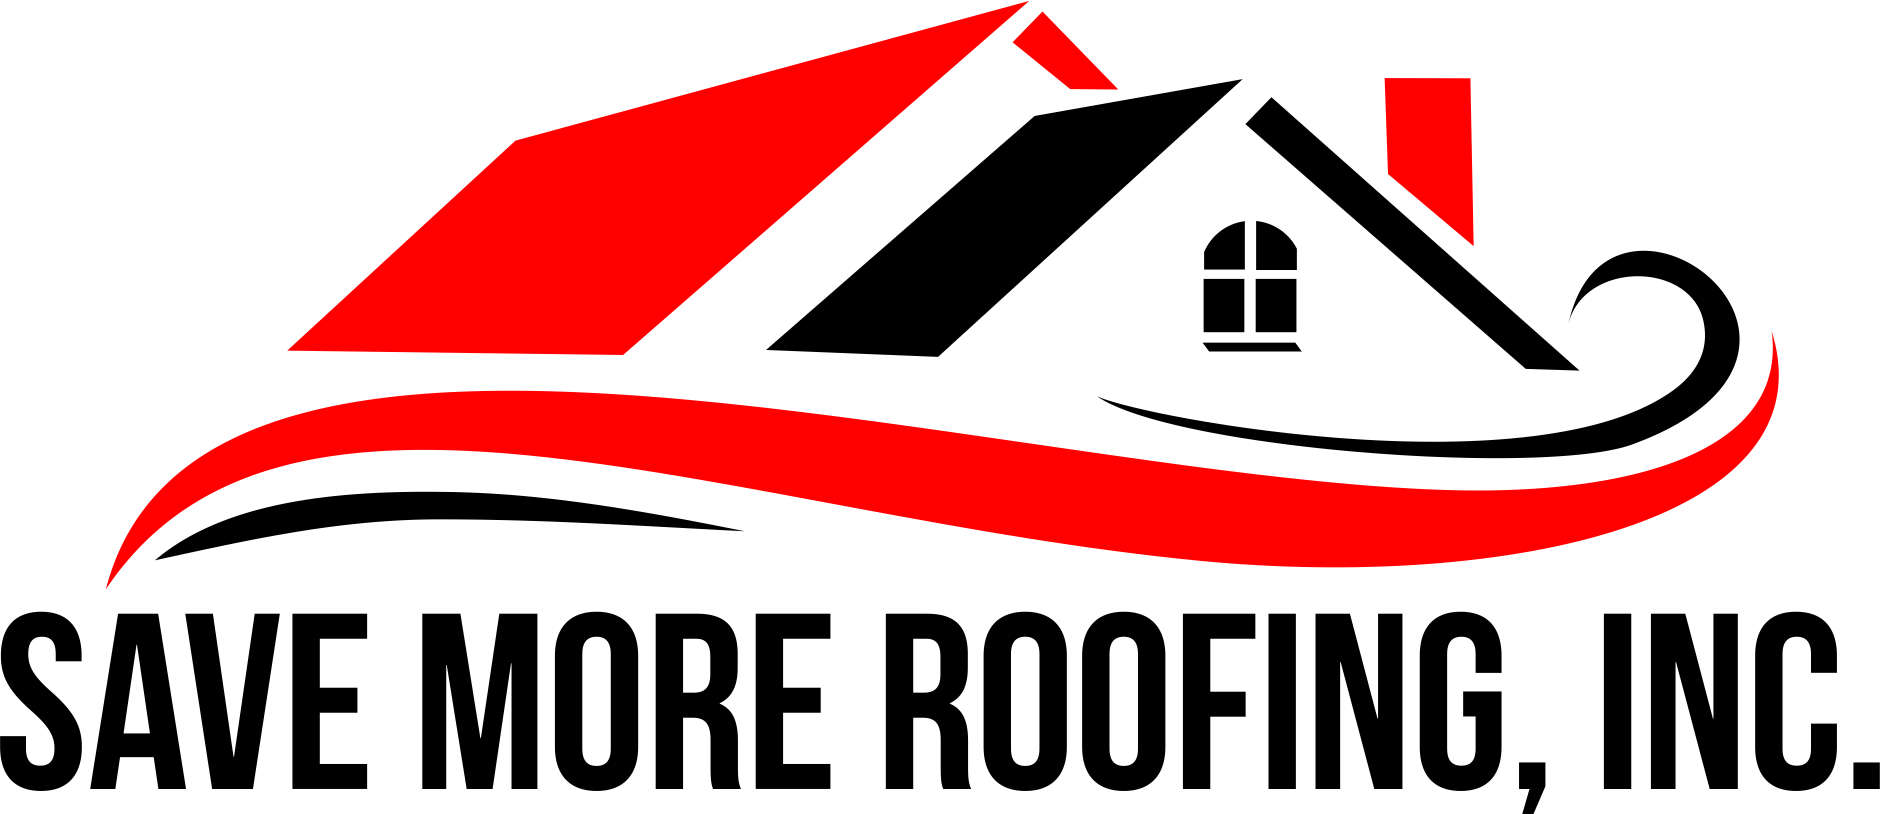 Save More Roofing Inc Logo